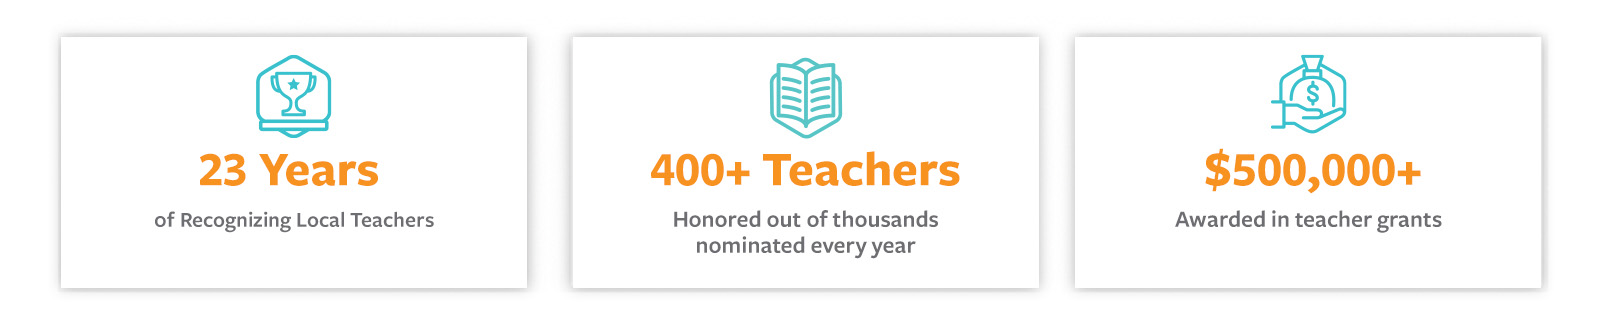 23 years, 400+ teachers and $500,000 awarded in grants 